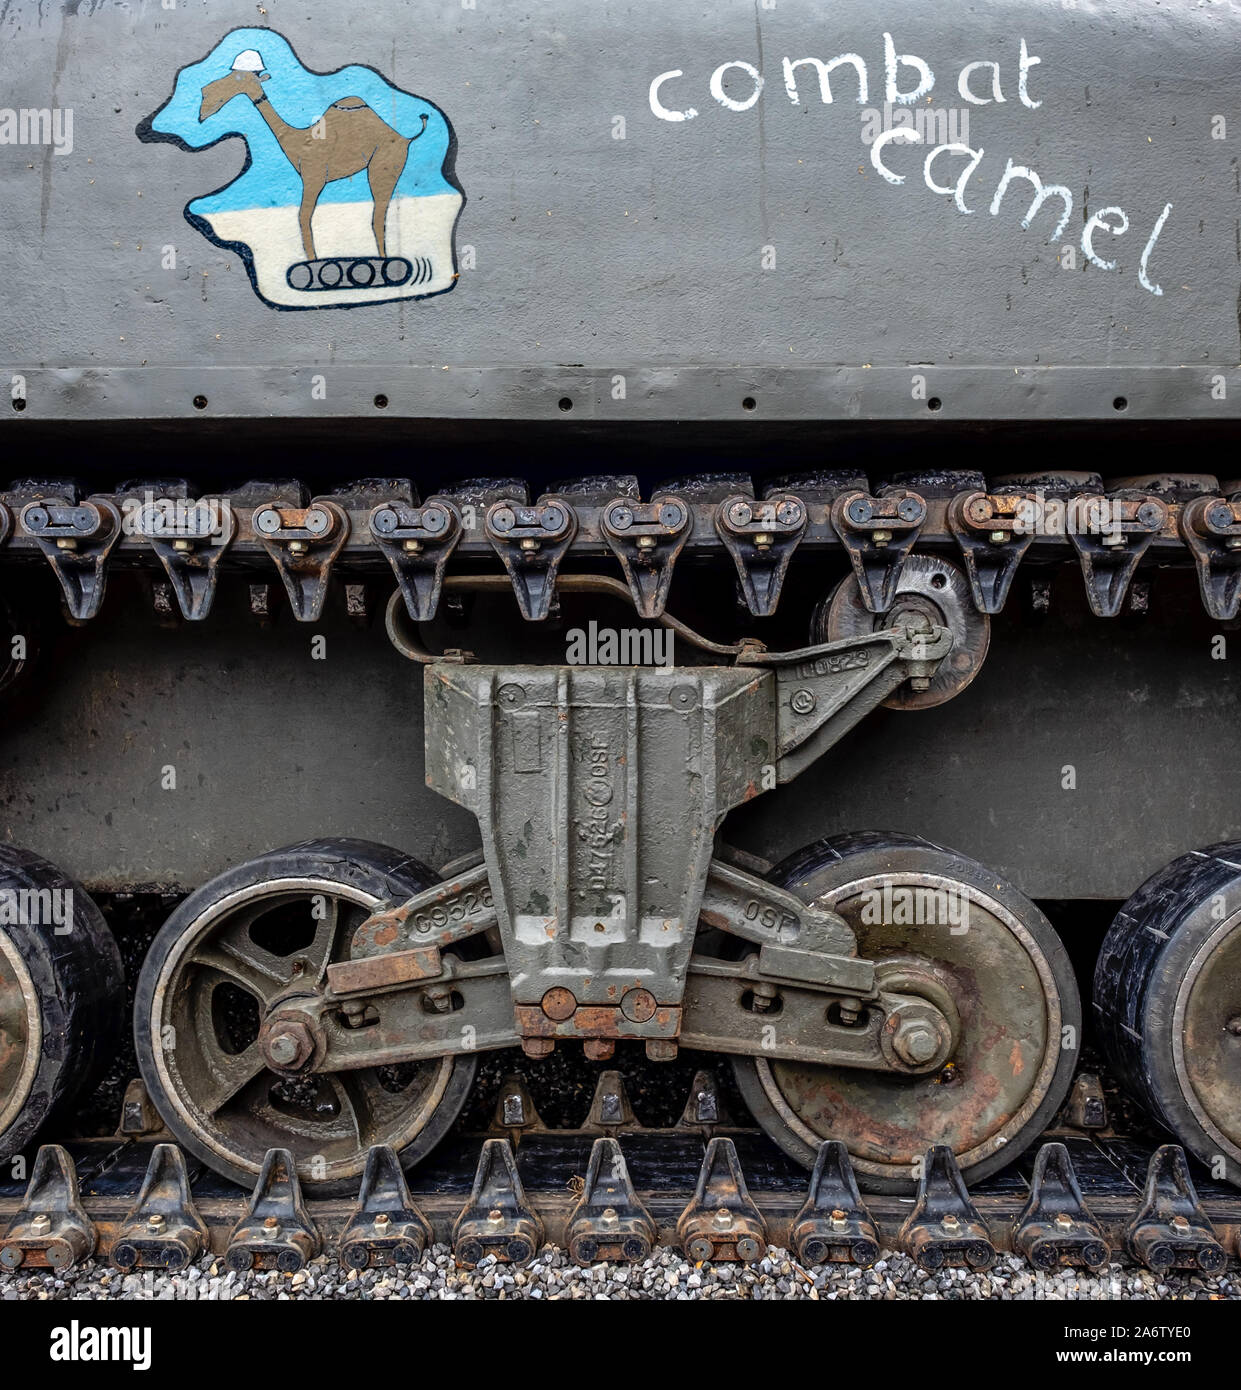 Detail of the wheels and track of a Sherman tank with decoration and text. Stock Photo